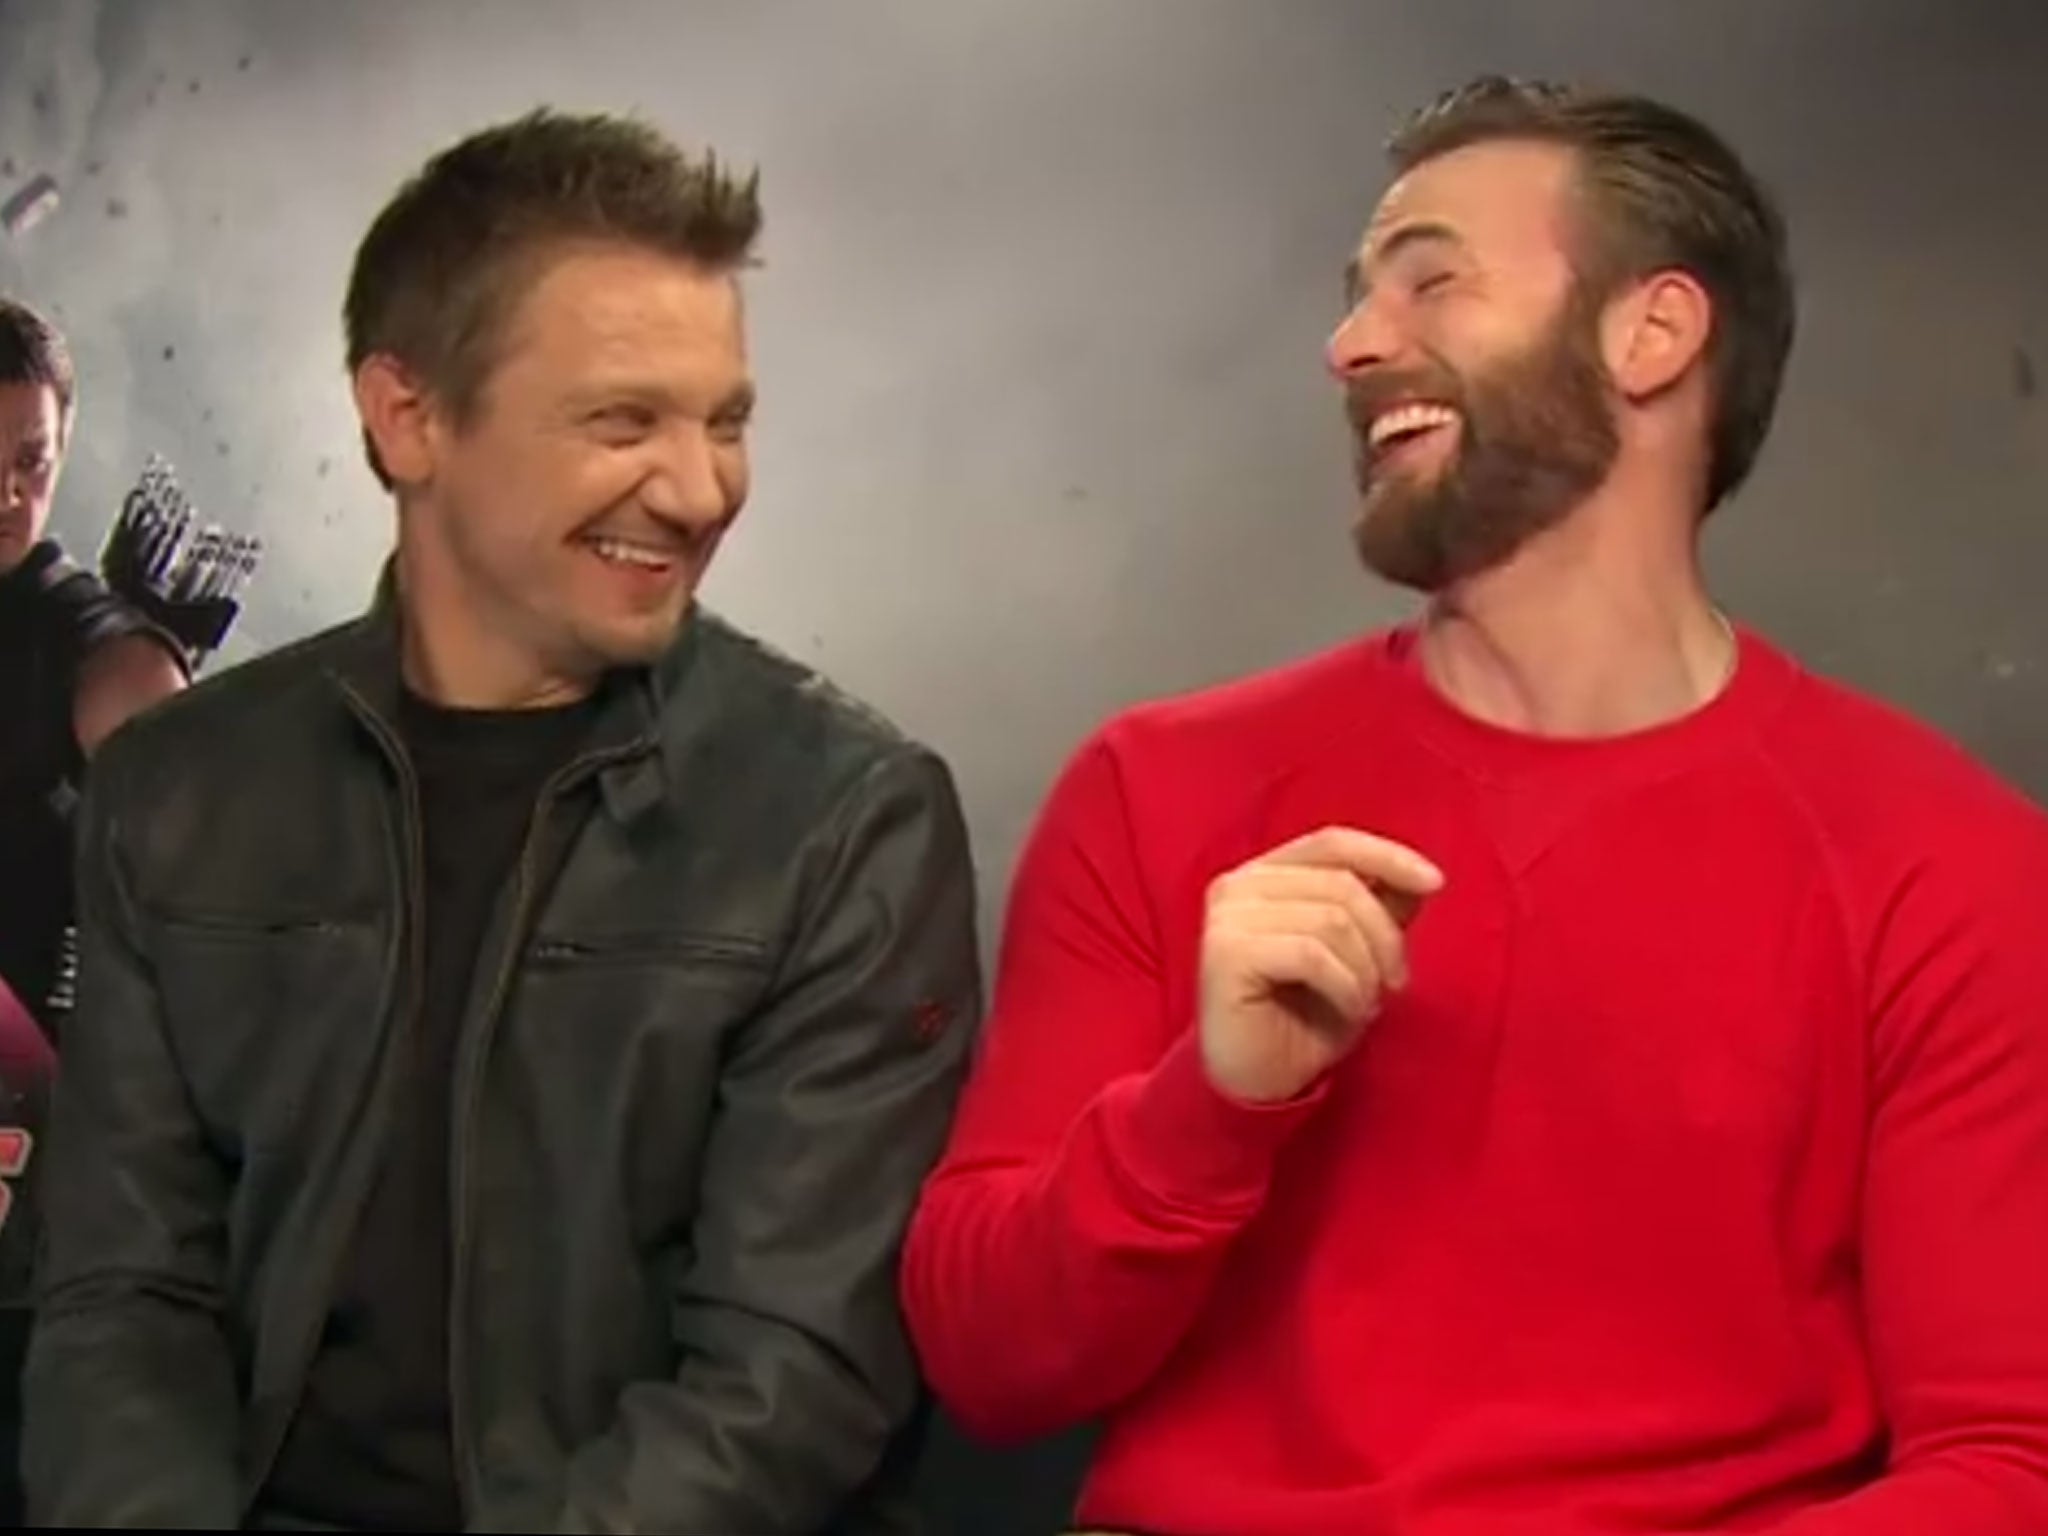 Jeremy Renner and Chris Evans laugh at their Black Widow joke in an Avengers: Age of Ultron interview